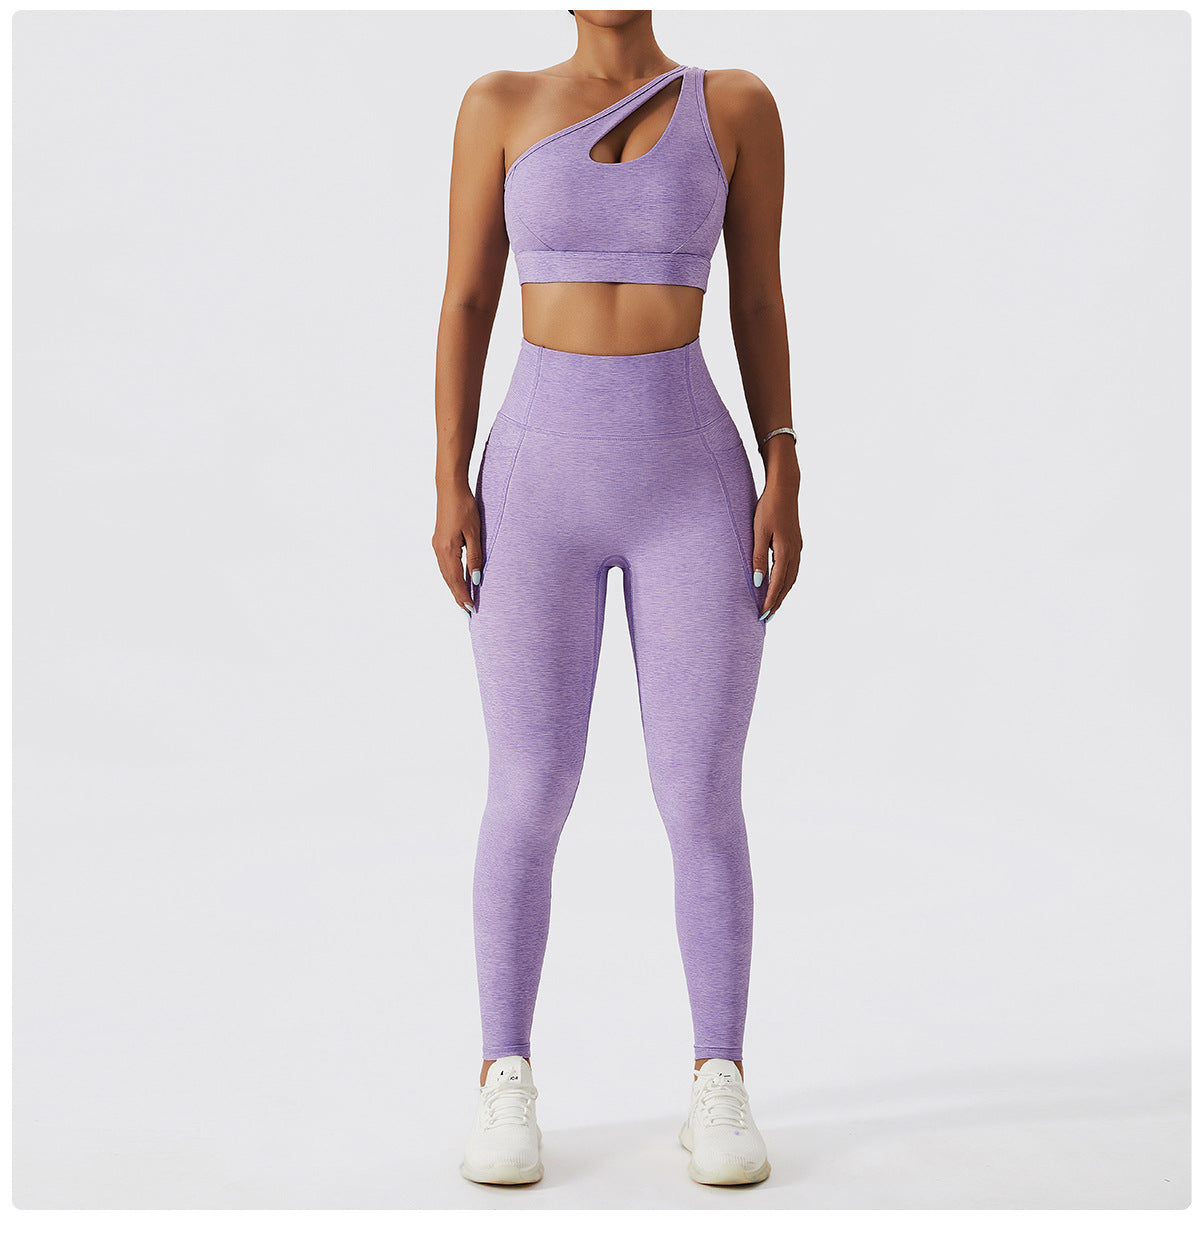 2023 Activewear Fashion Trends | Lilac Lavender One Shoulder Sports Bra and High Waist Leggings Gym Outfit 2-piece Set